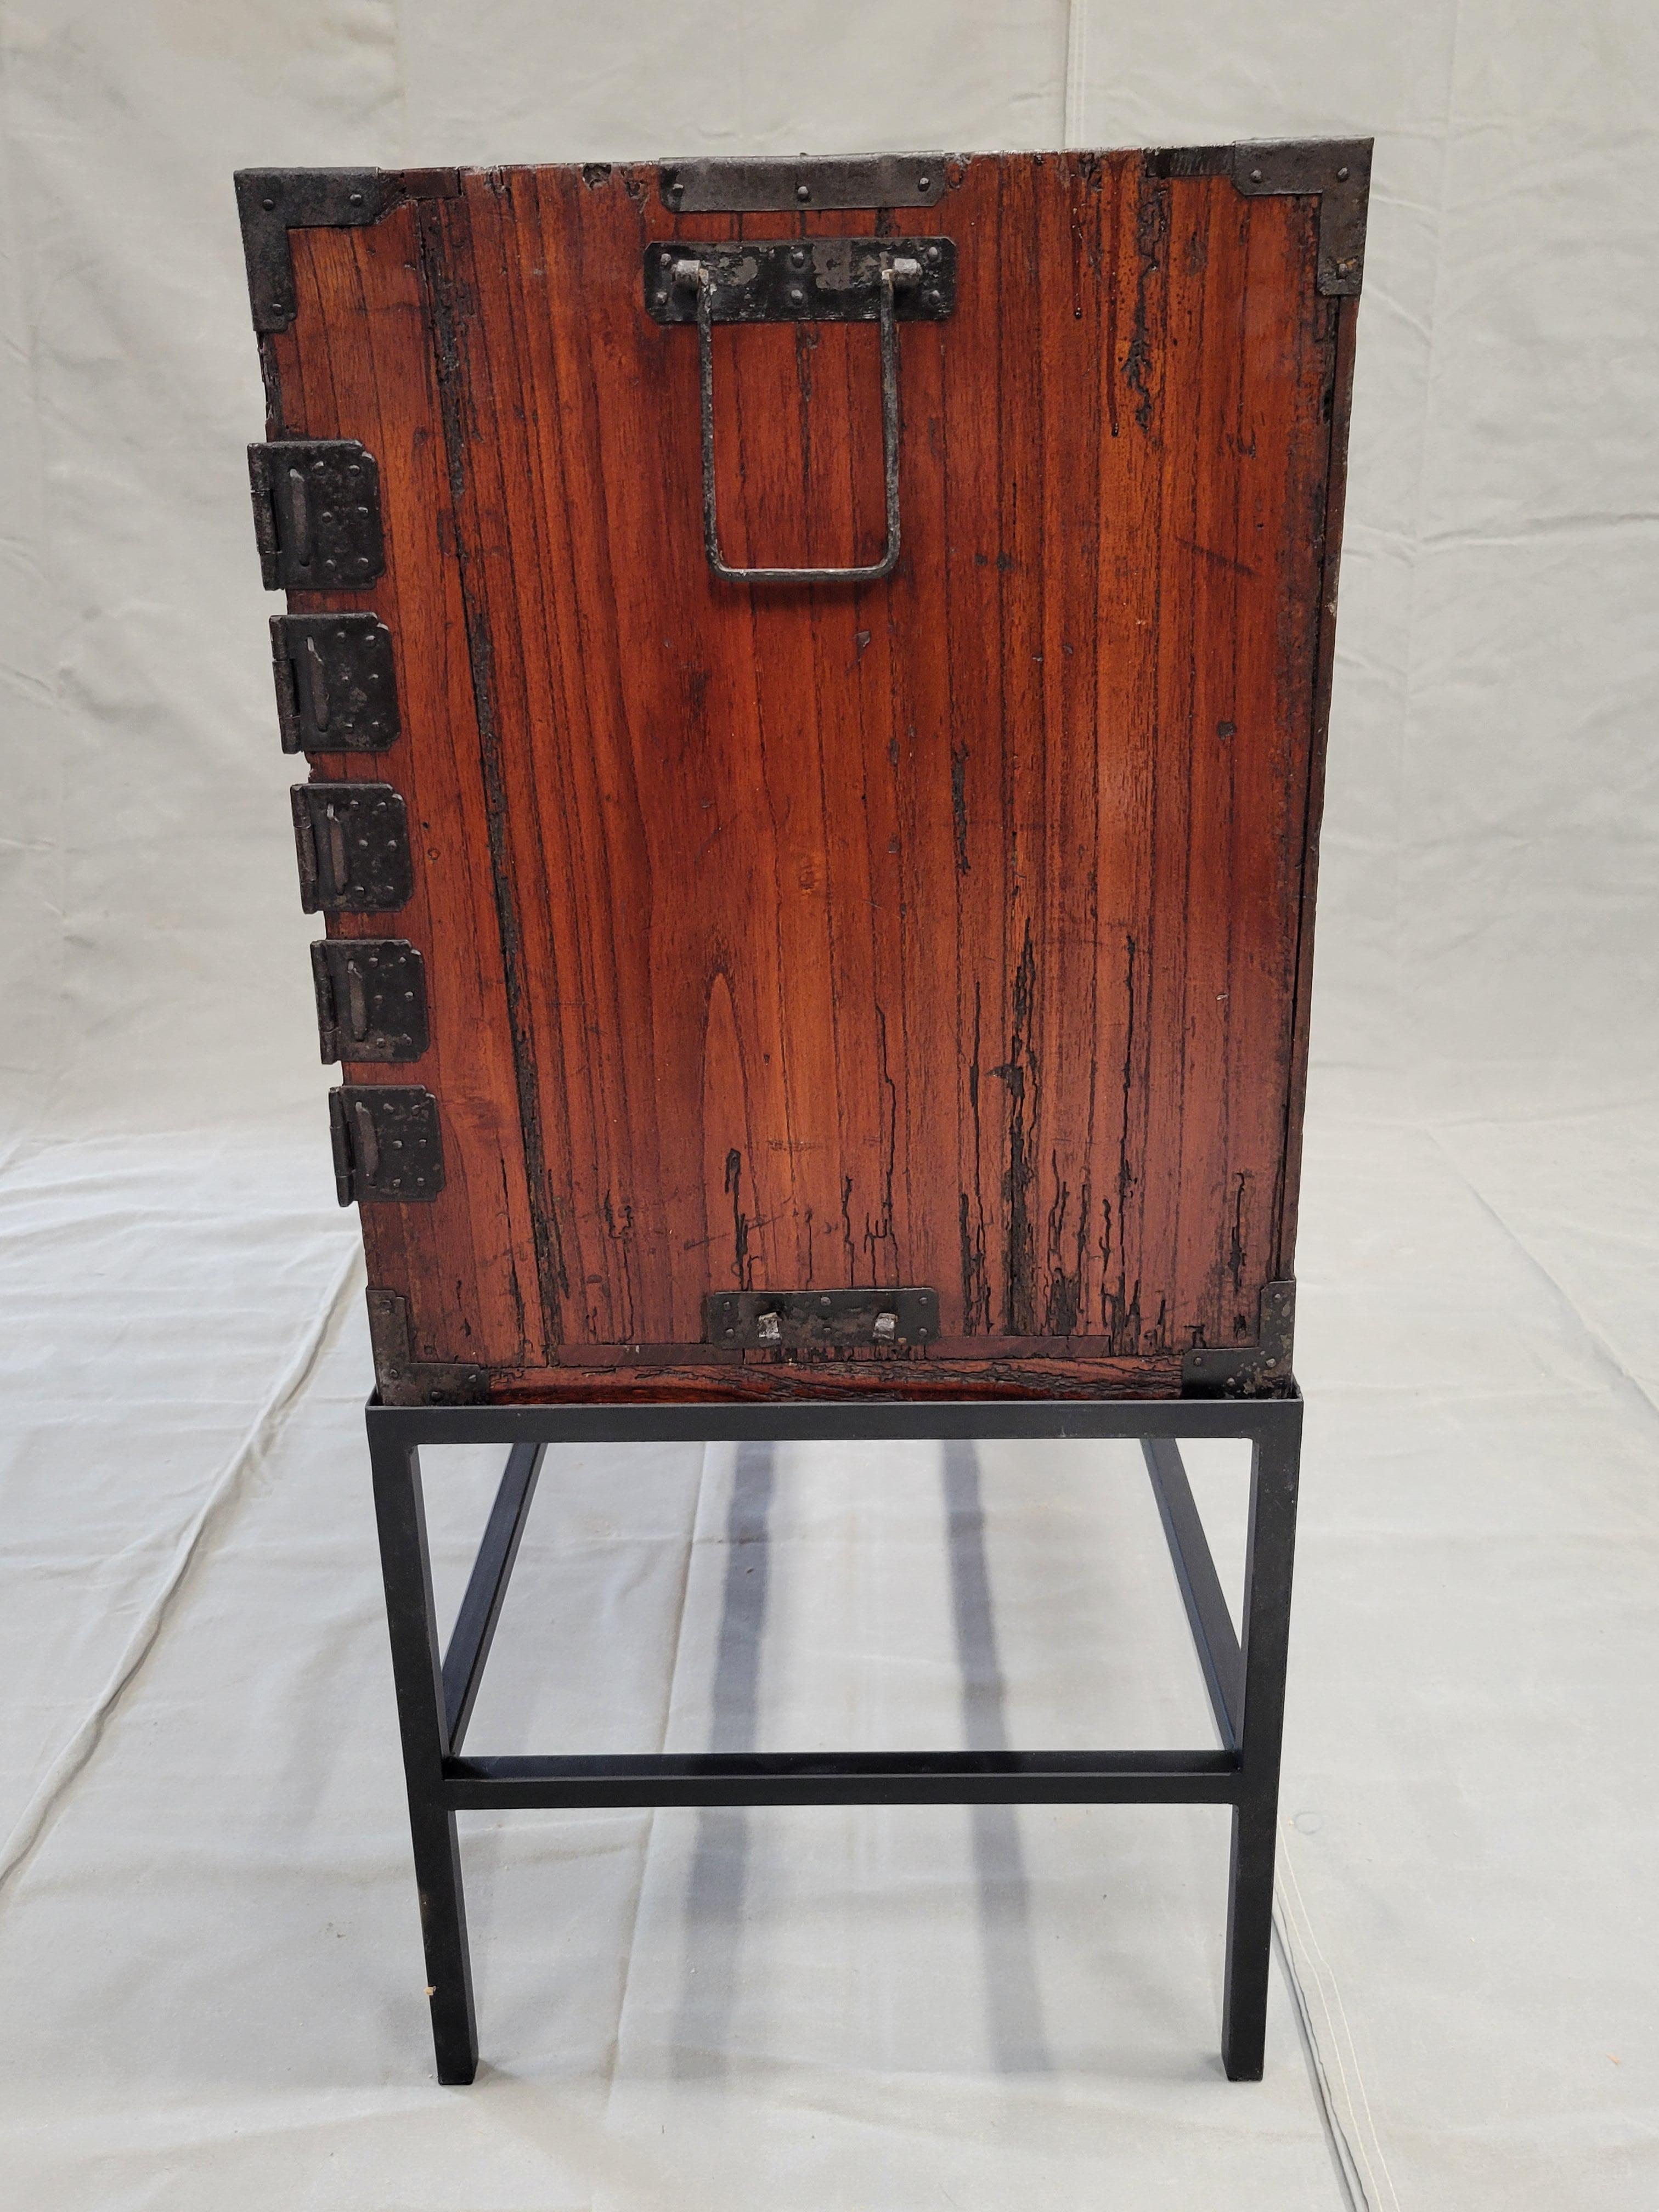 Antique Japanese Tansu Chest With Drawers on Contemporary Metal Stand Console For Sale 3